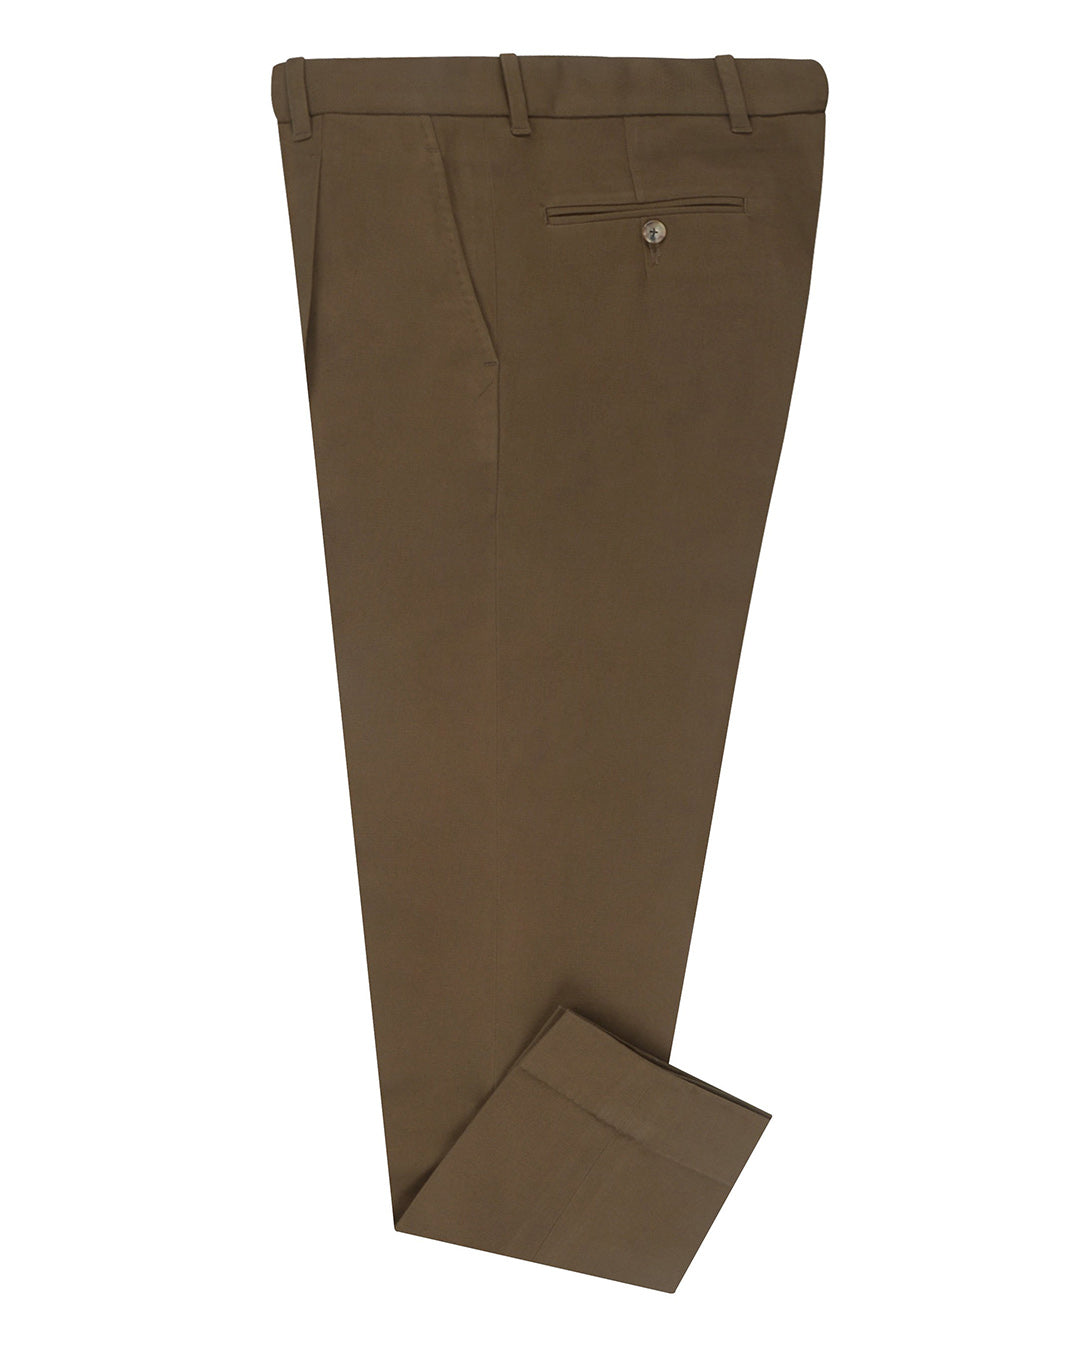 Wool & Prince Stretch Canvas Pants Review 